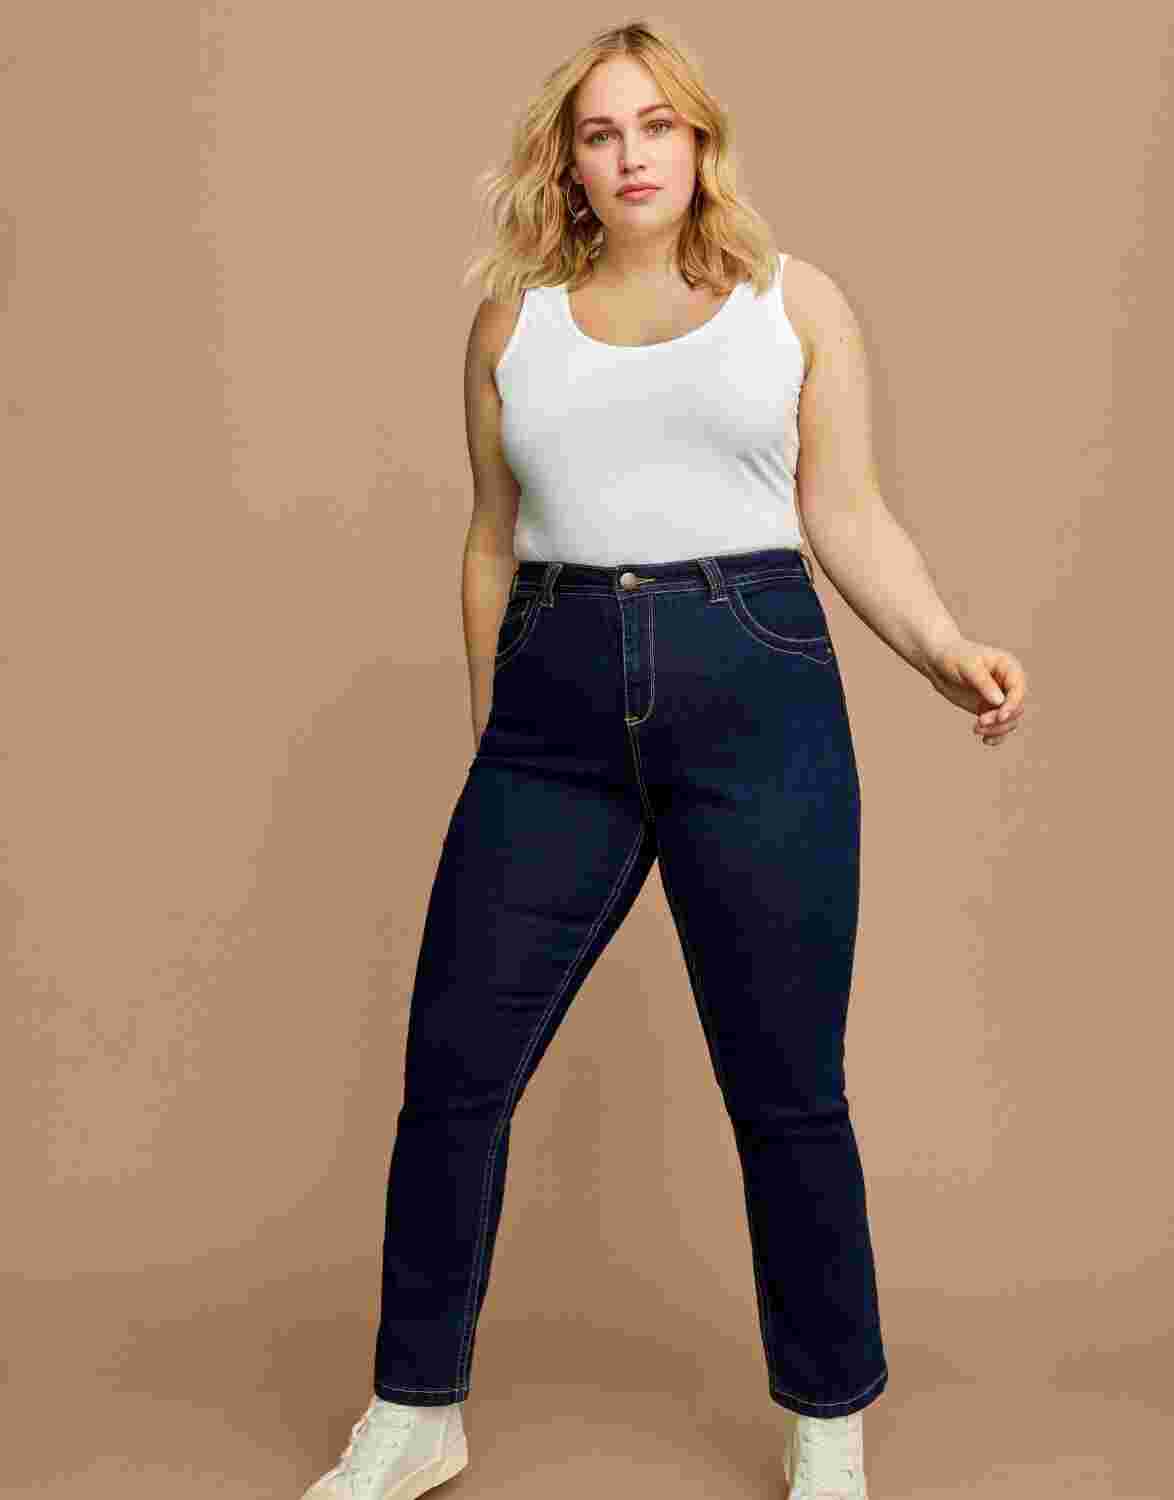 Super high waisted jeans